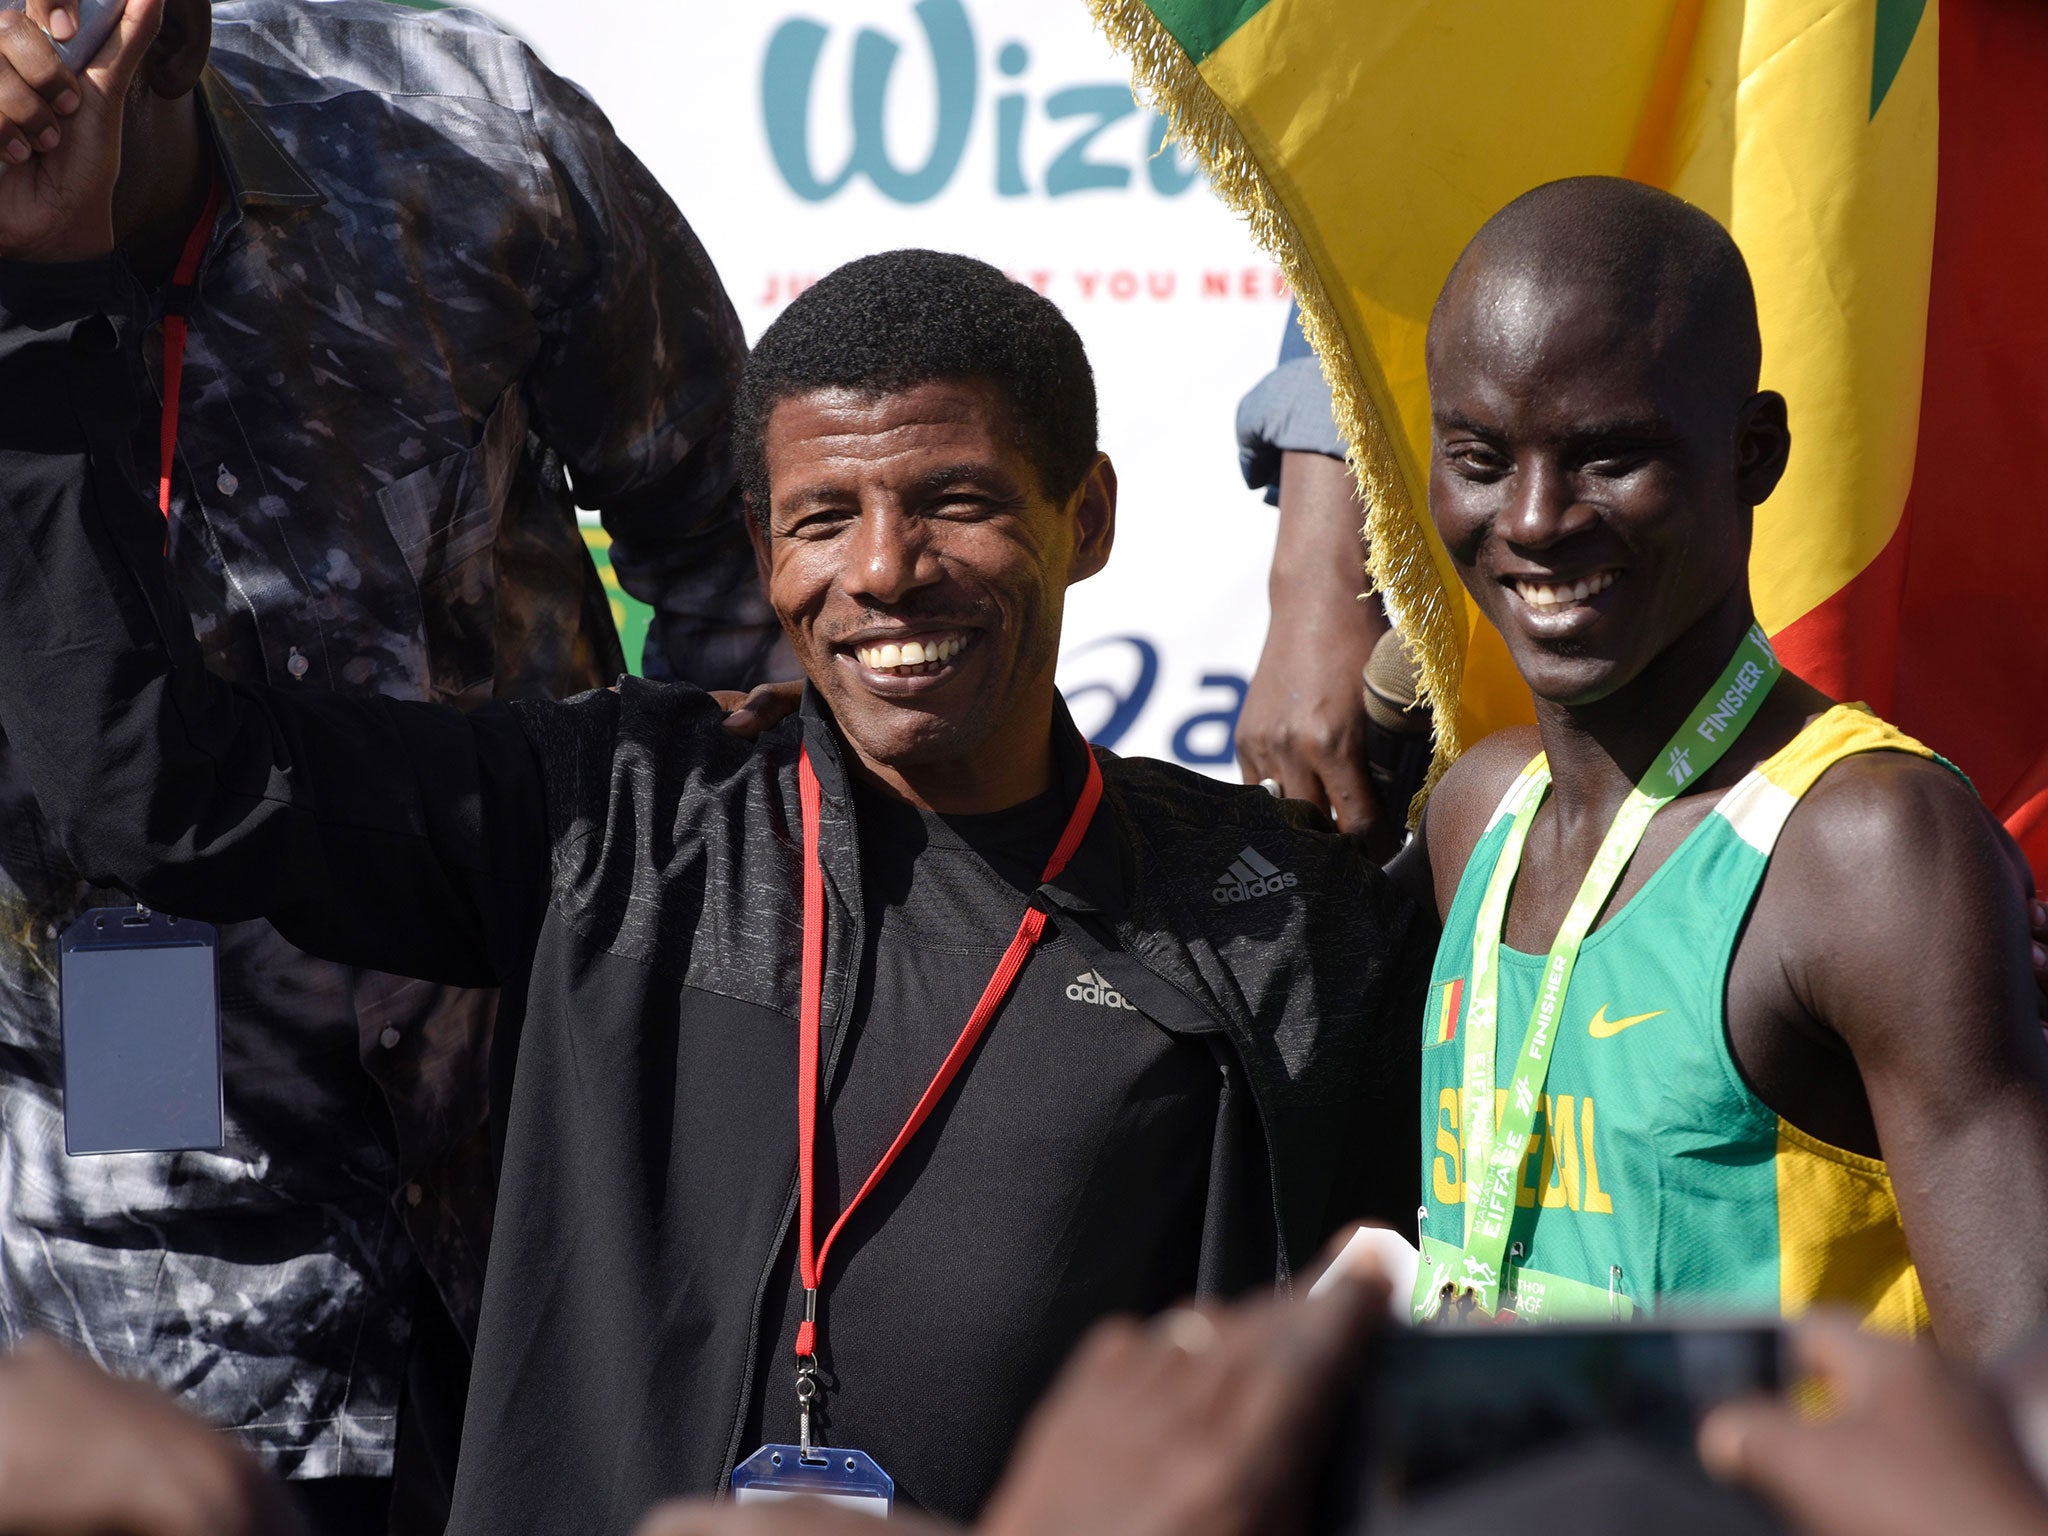 Gebrselassie believes winning while Russian athletes are banned will not be as fulfilling